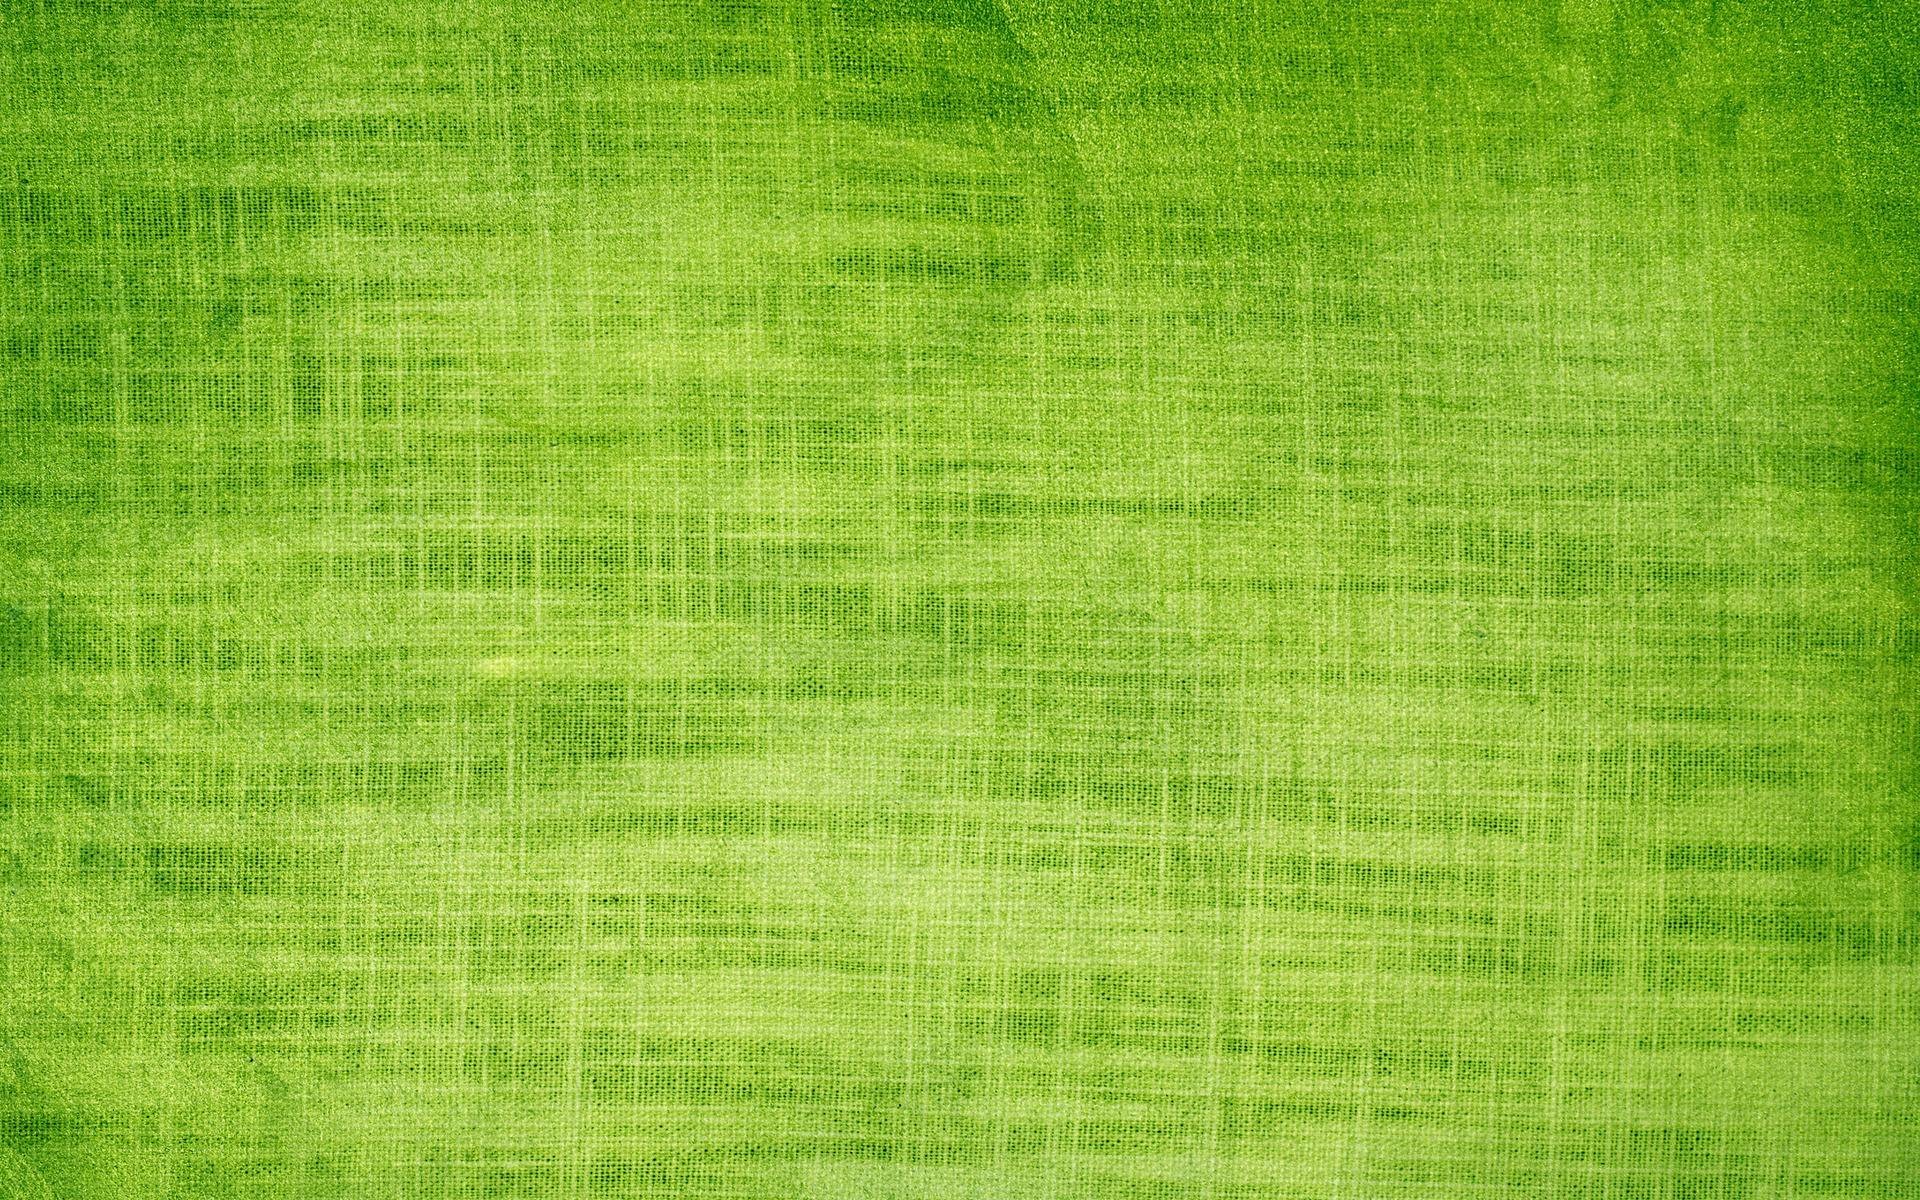 1920x1200 free Green Textures wallpaper, resolution : 2560 x tags: Green, Textures.